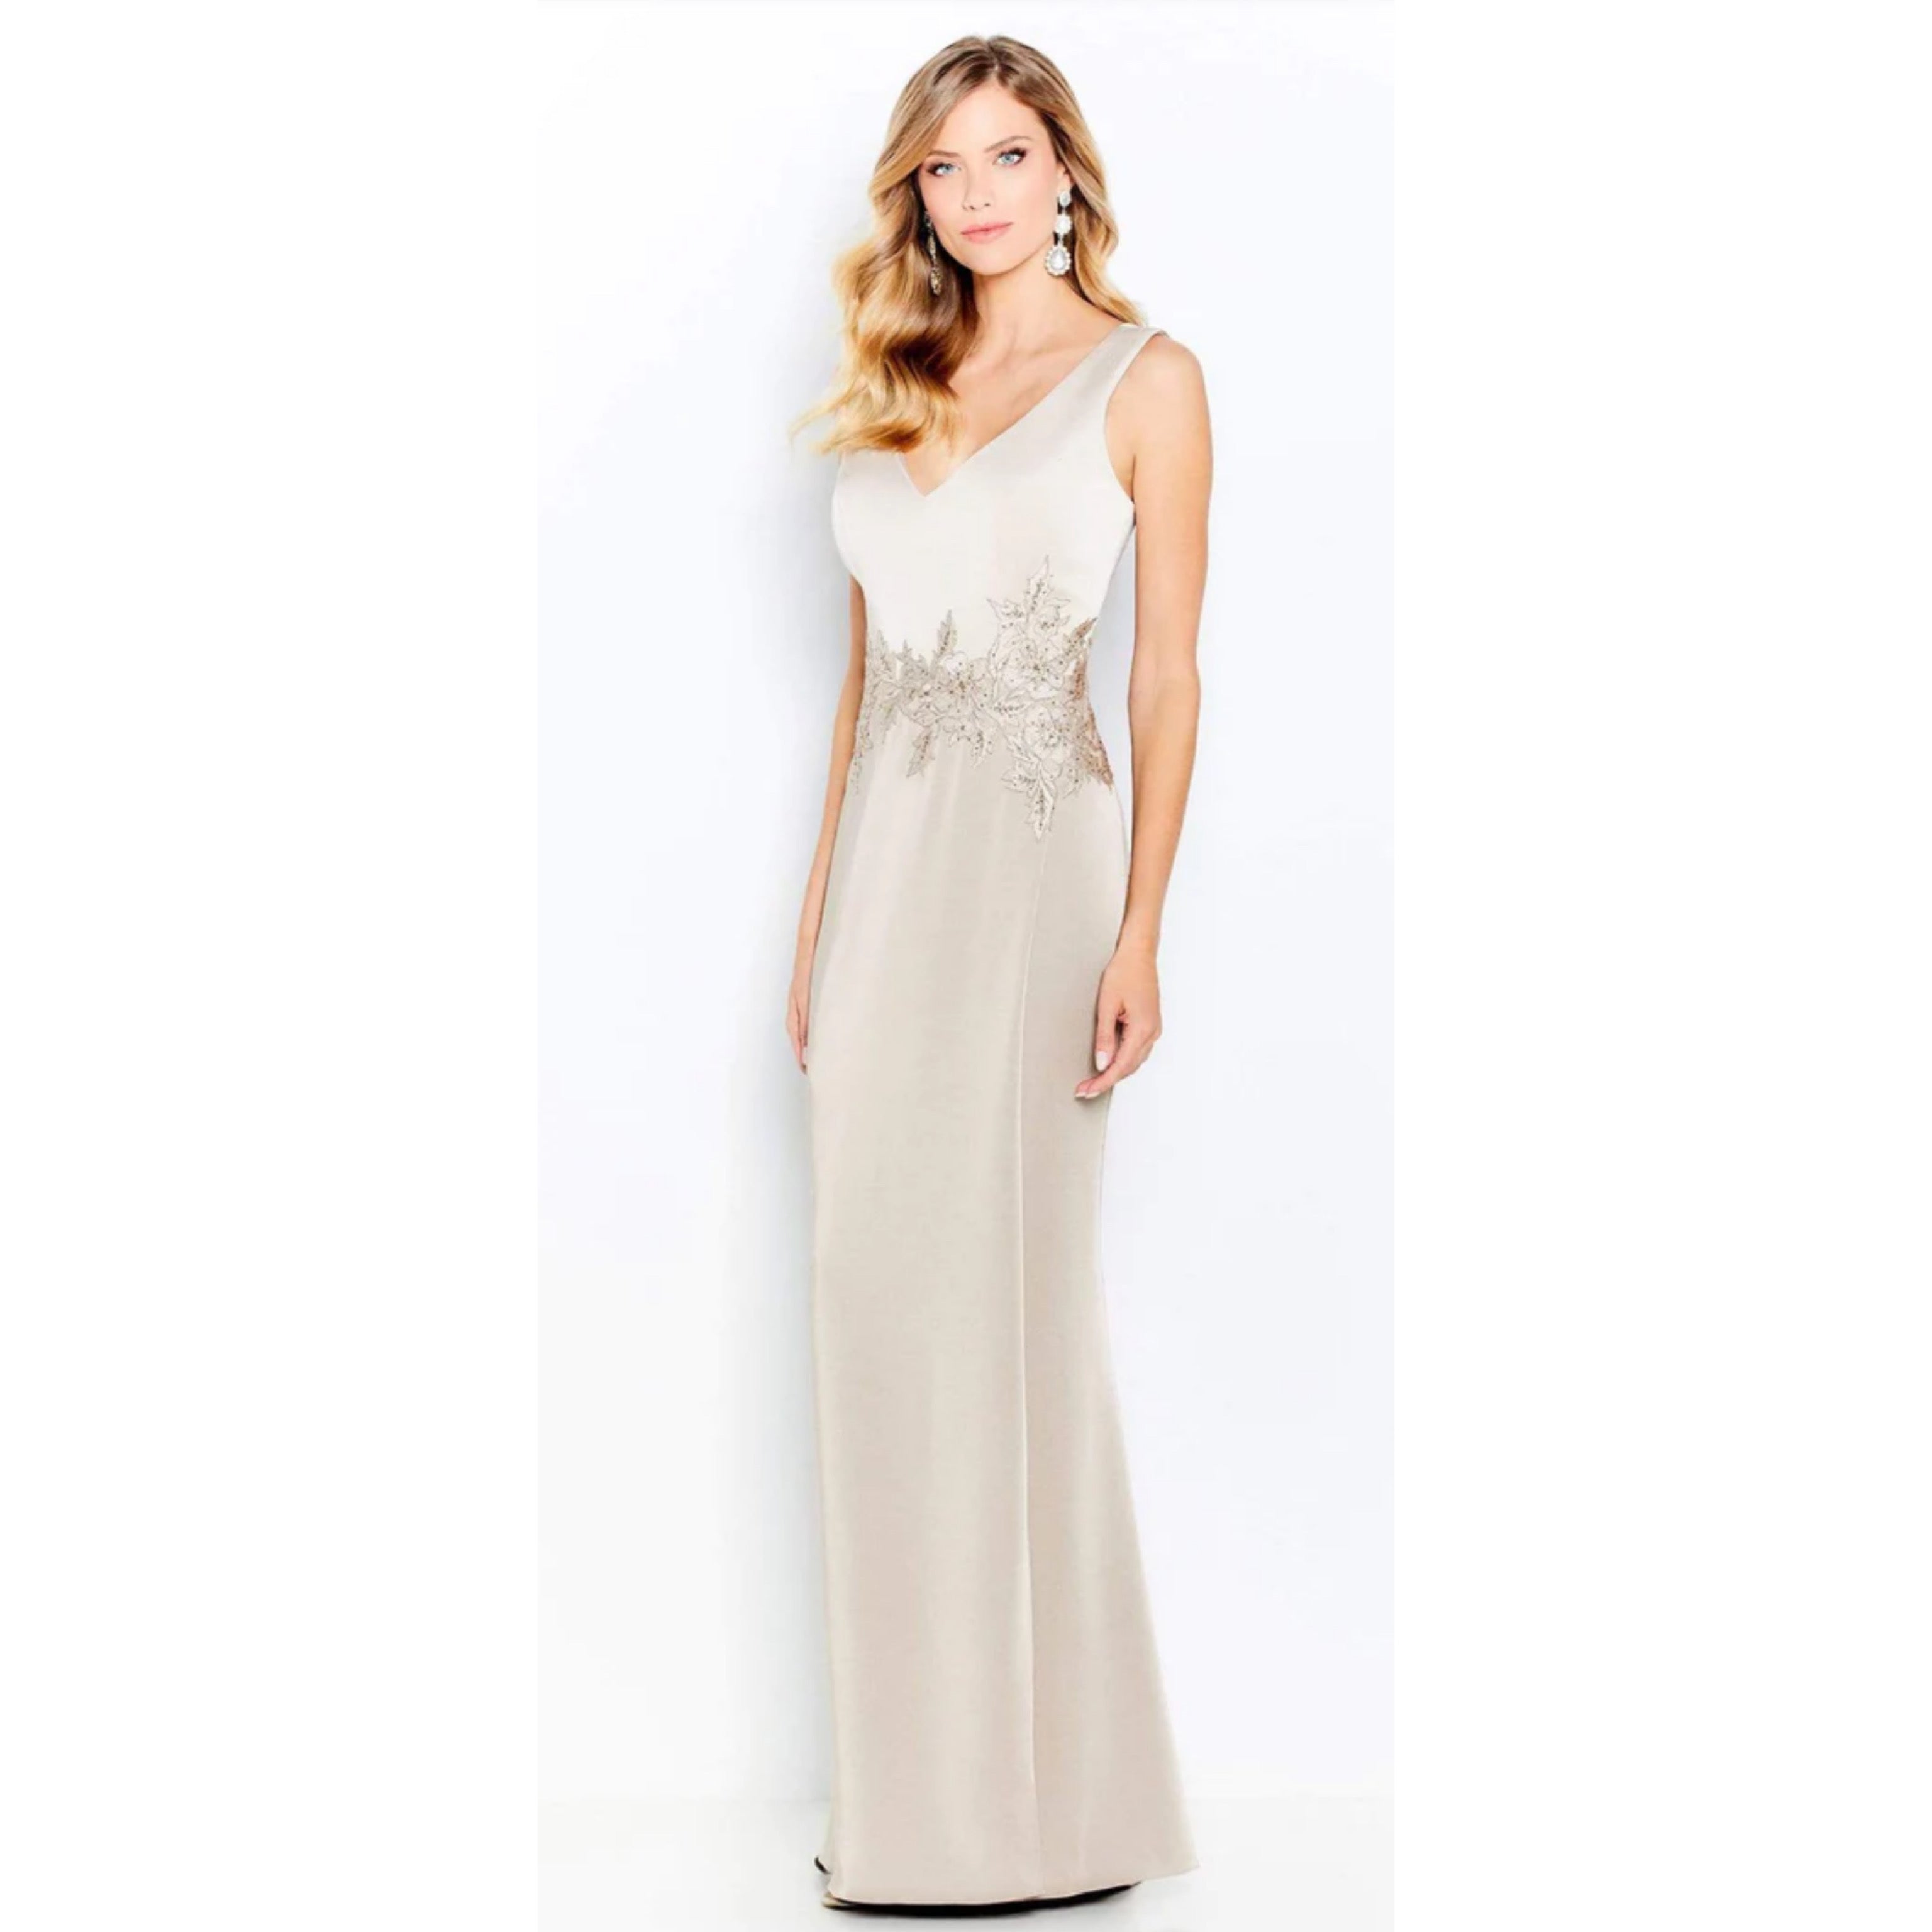 Cameron Blake champagne dress, size 14, NEW WITH TAGS!